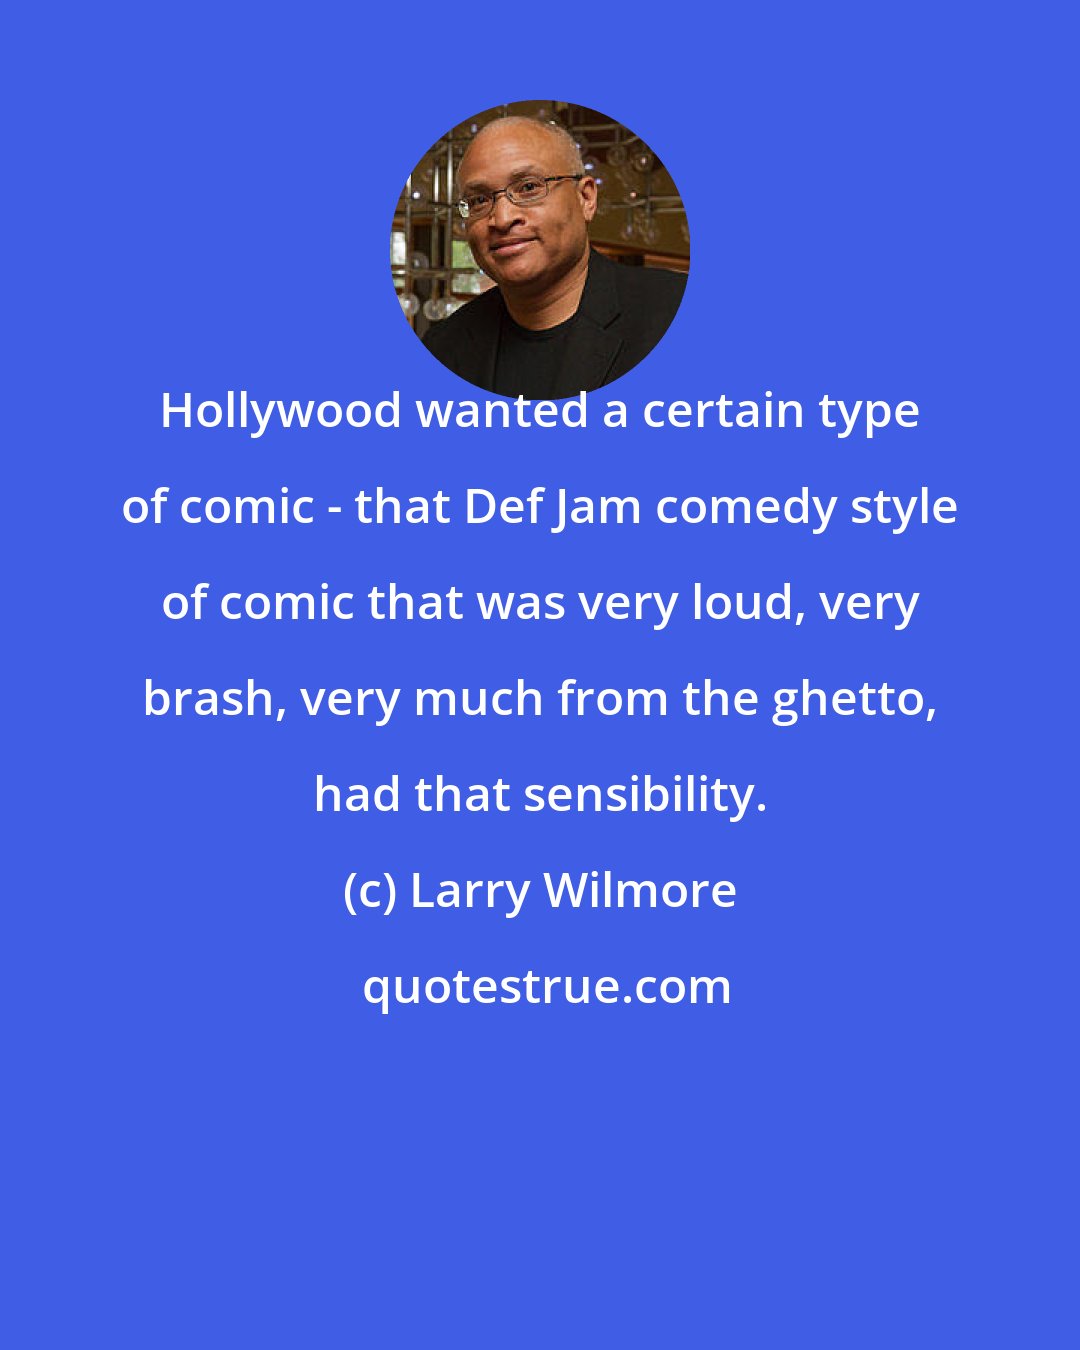 Larry Wilmore: Hollywood wanted a certain type of comic - that Def Jam comedy style of comic that was very loud, very brash, very much from the ghetto, had that sensibility.